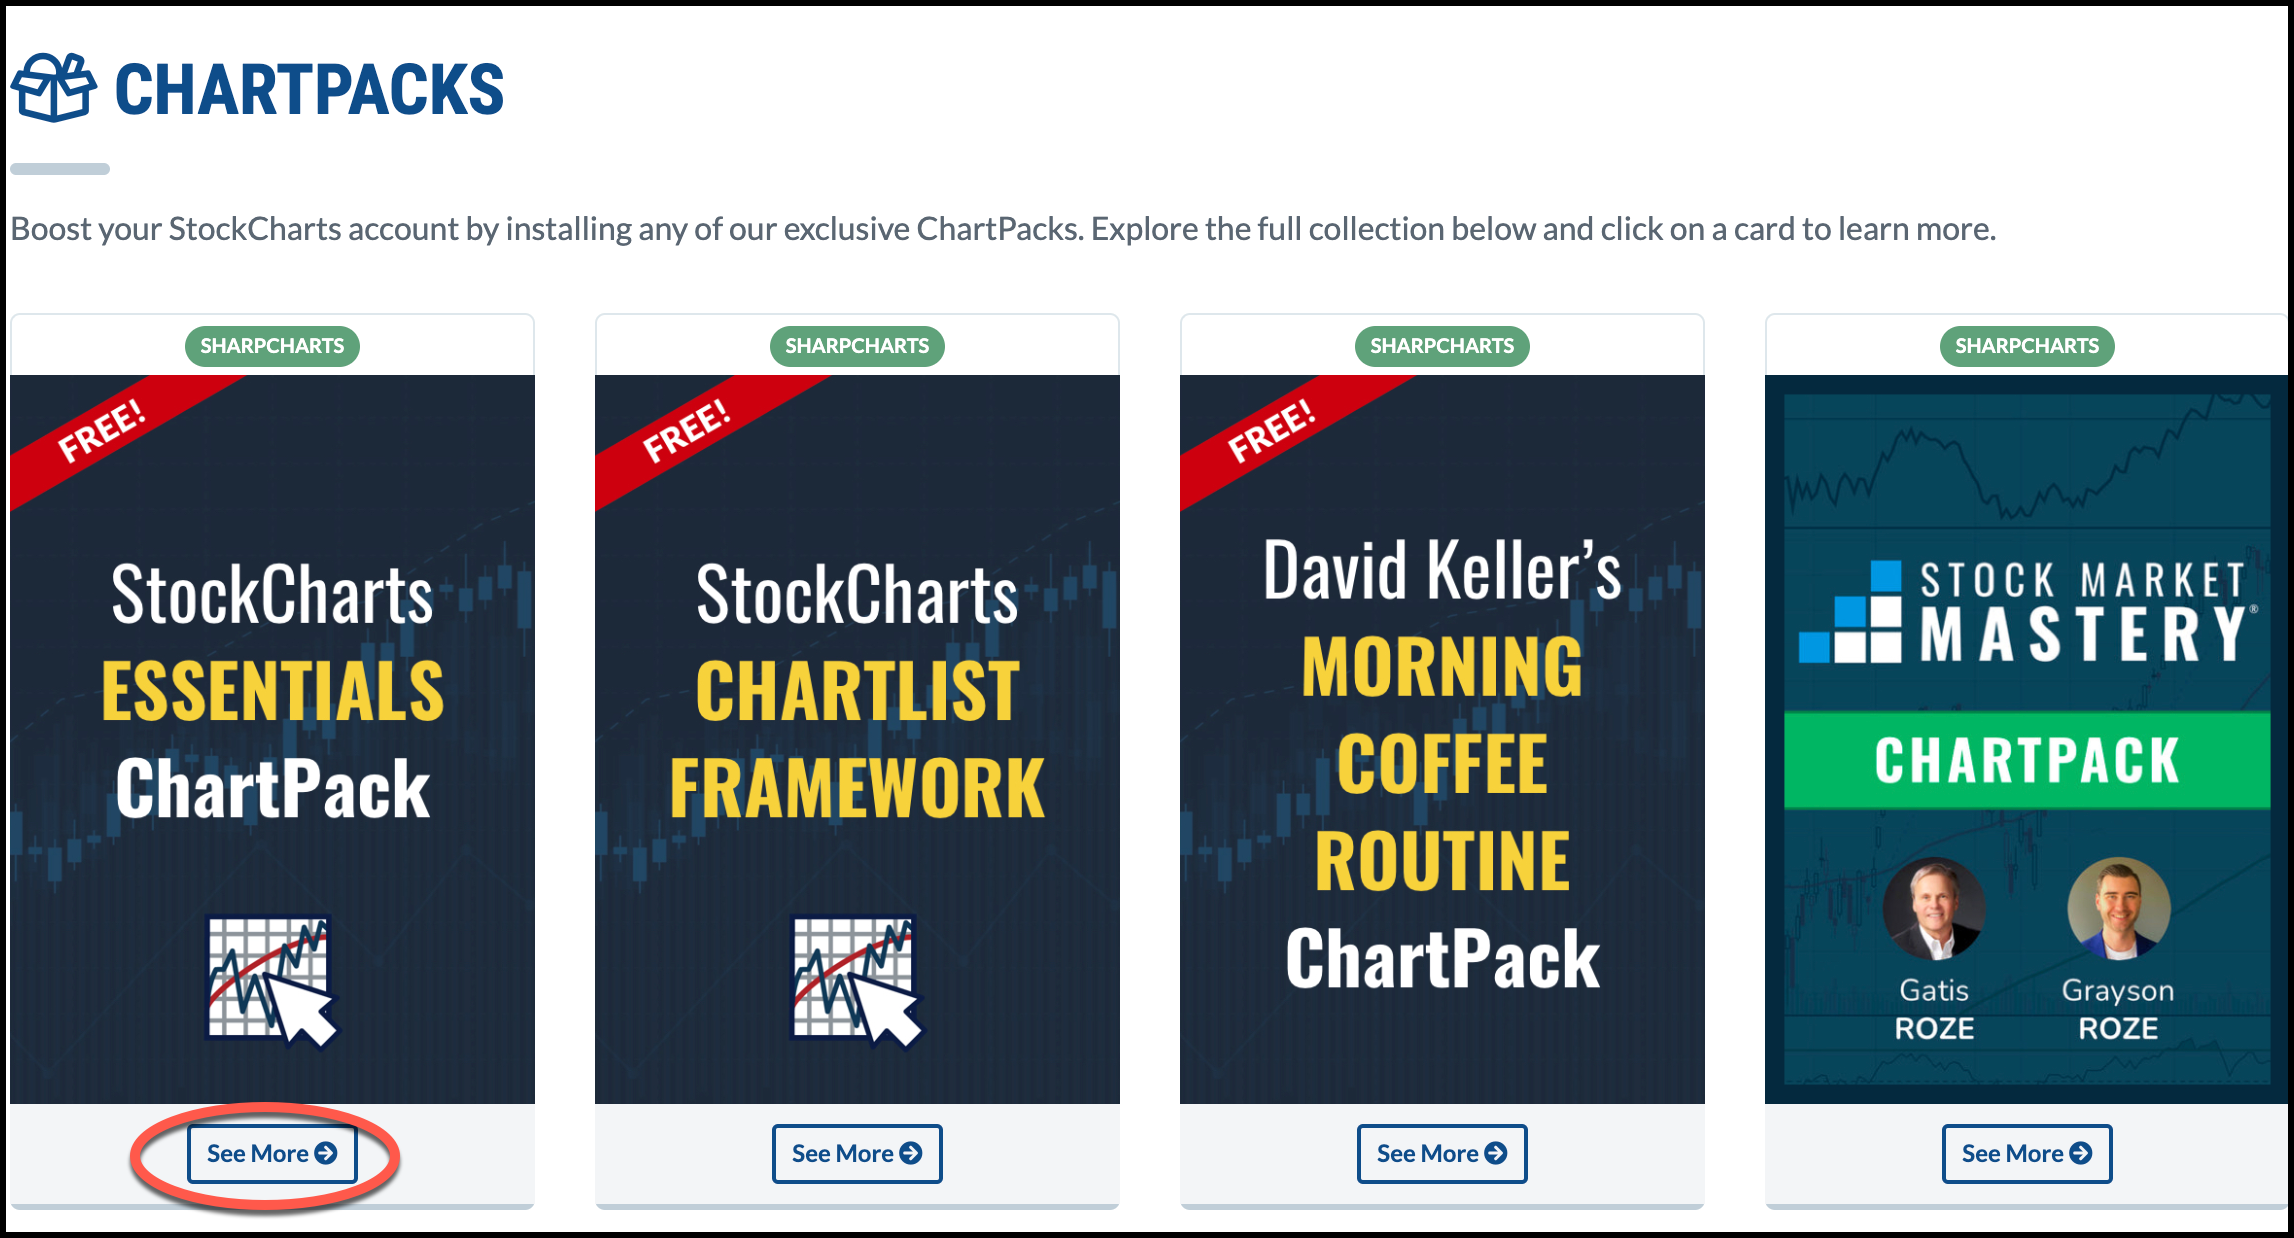 StockCharts' collection of ChartPacks